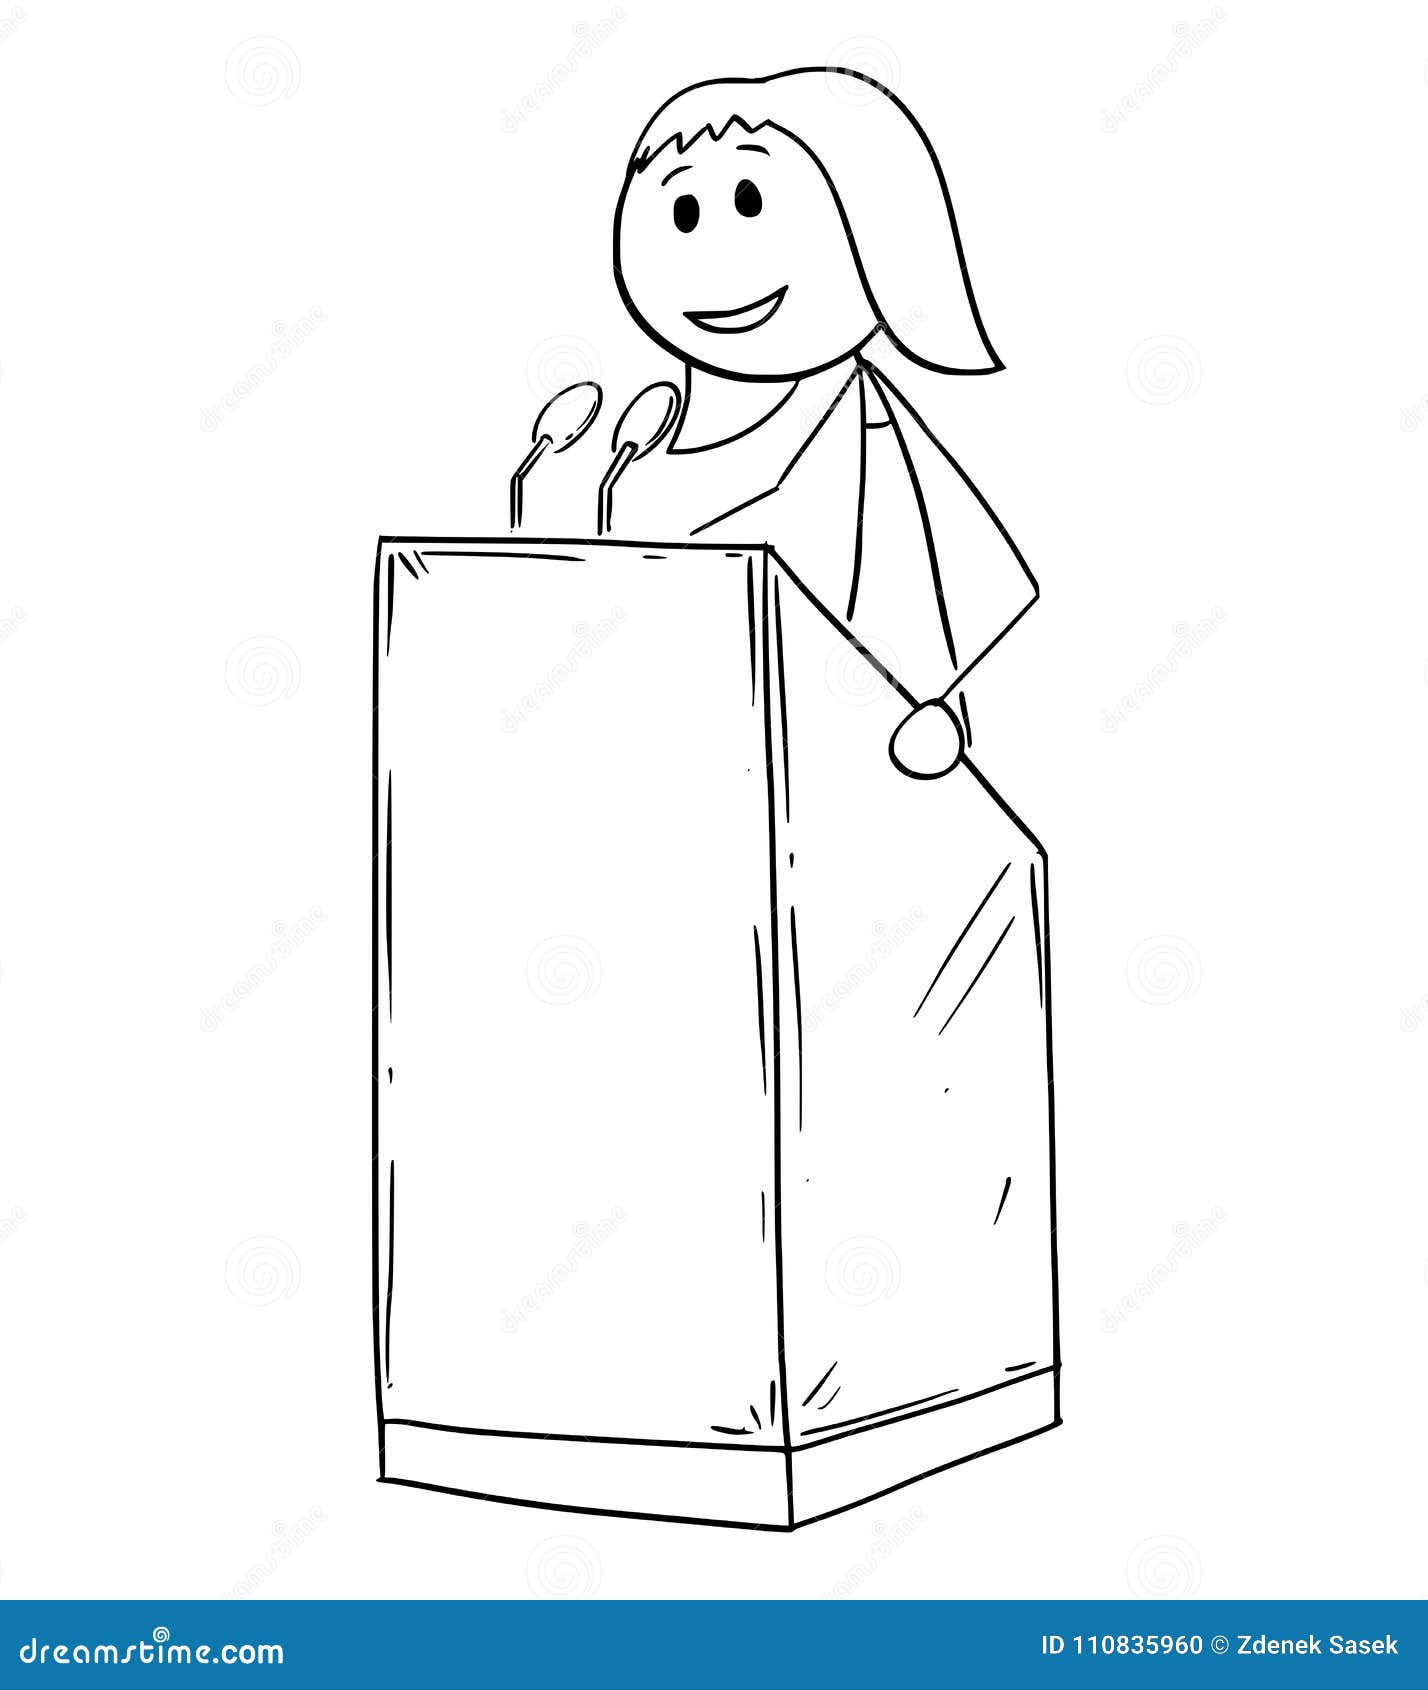 cartoon of businessman conference woman speaker or orator on podium behind lectern